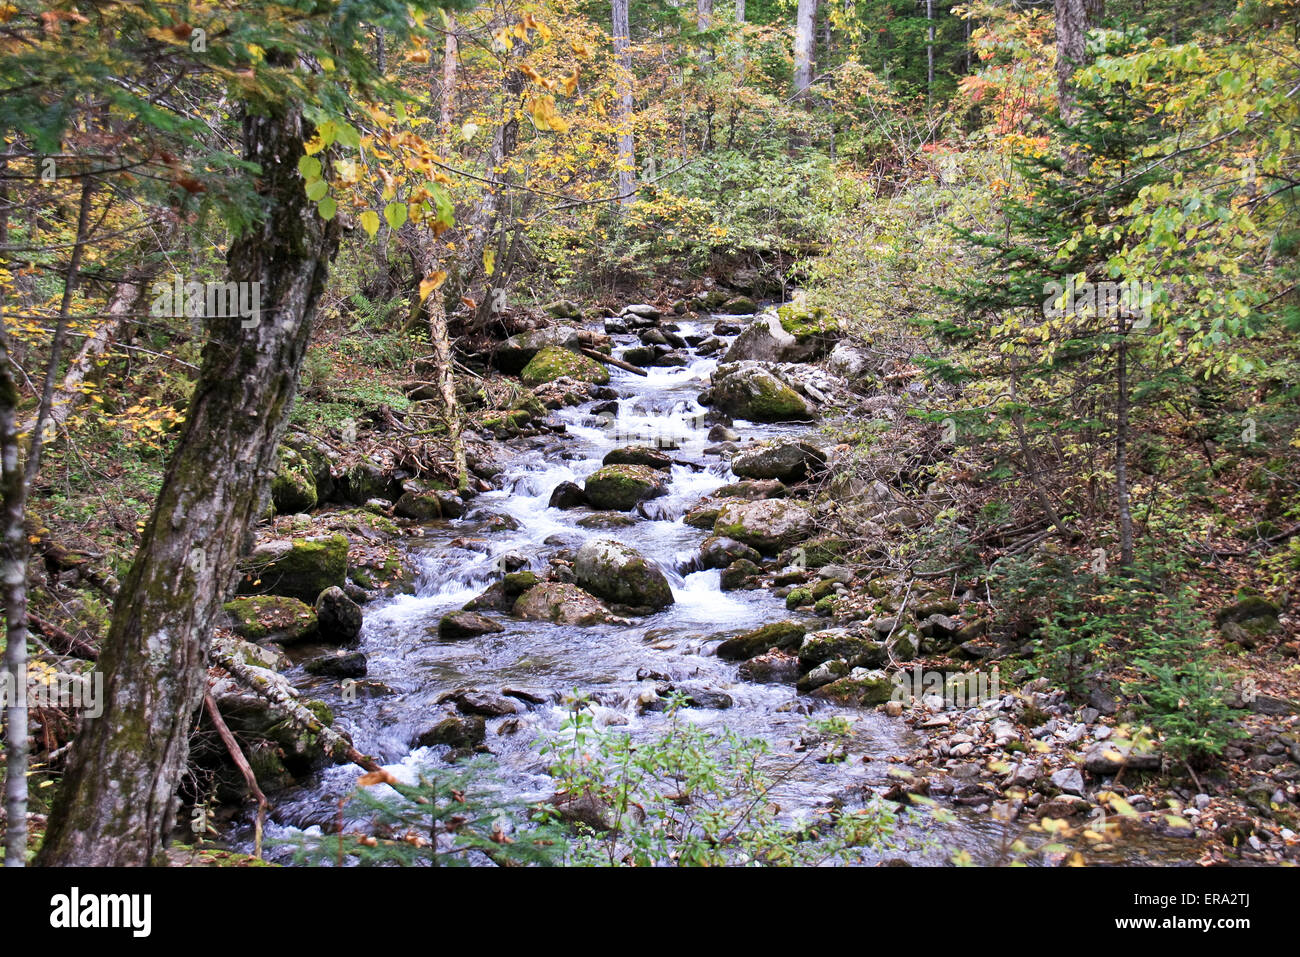 Forest landscape - dense forest and cold mountain stream. Stock Photo